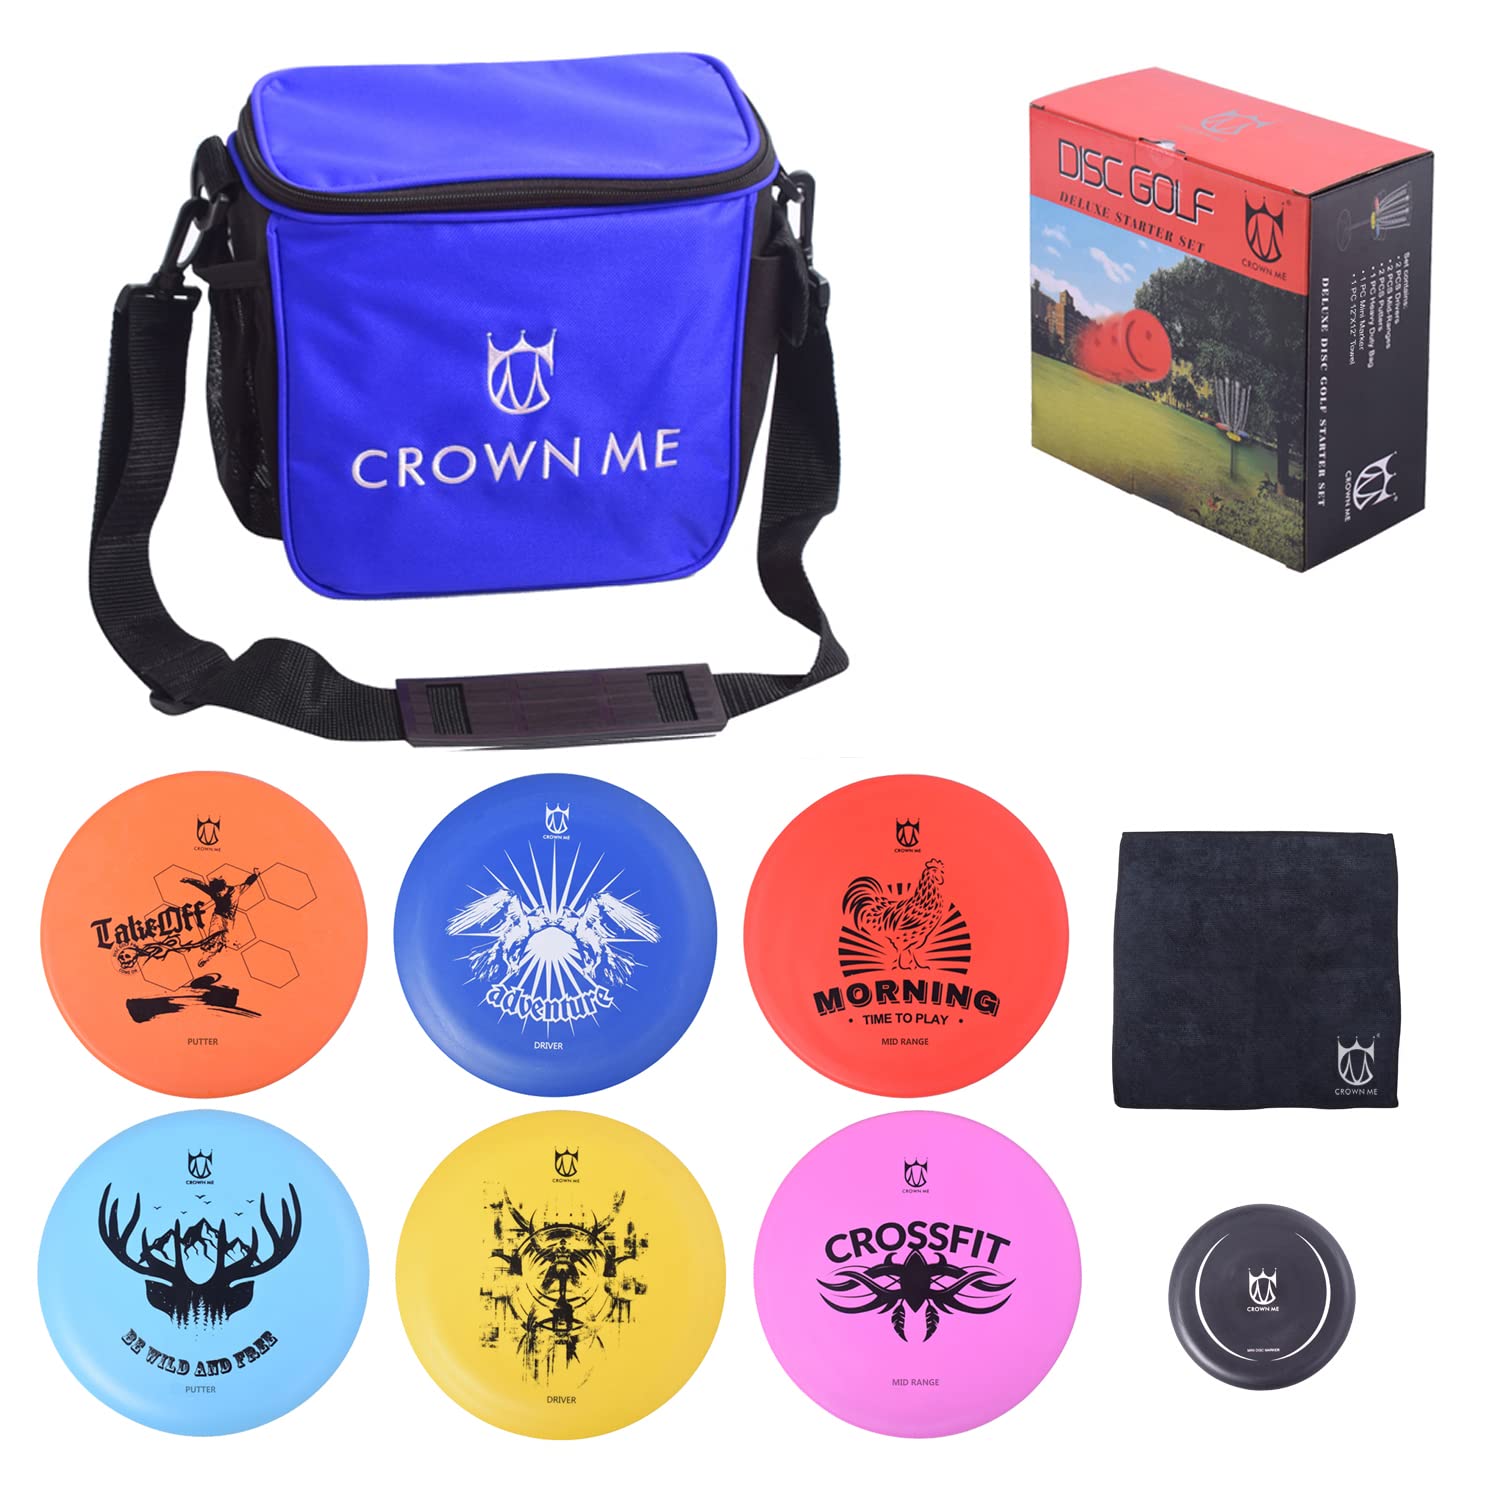 CROWN ME Disc Golf Set with 6 Discs and Mini Disc and Starter Disc